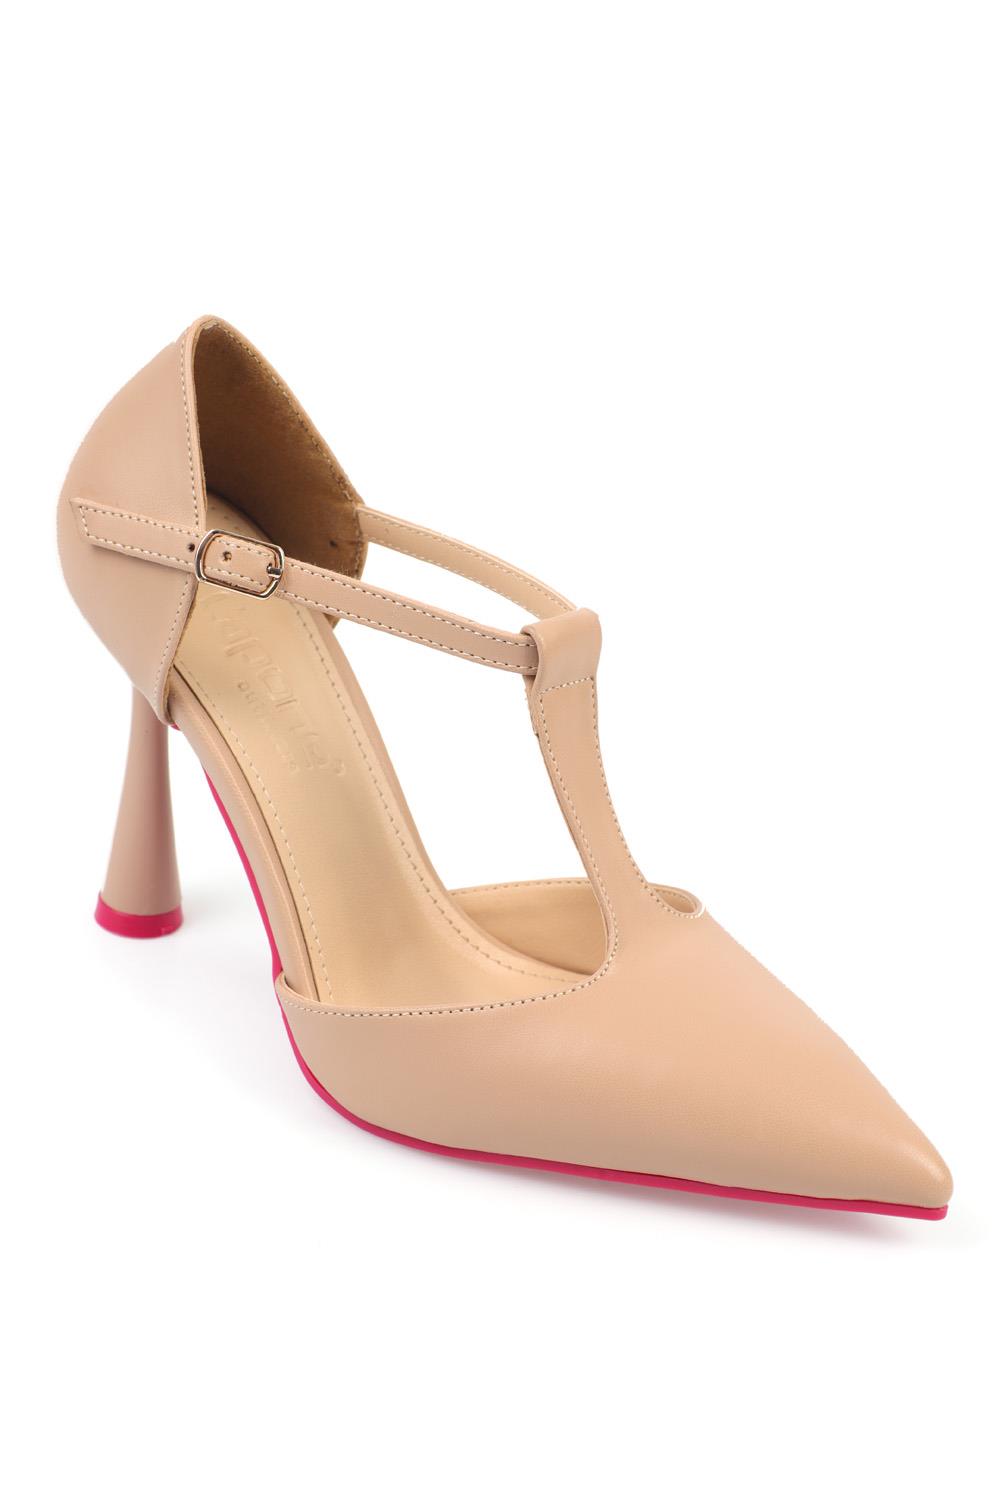 Buy Pink Belly Shoes - Heels for Women 8229485 | Myntra